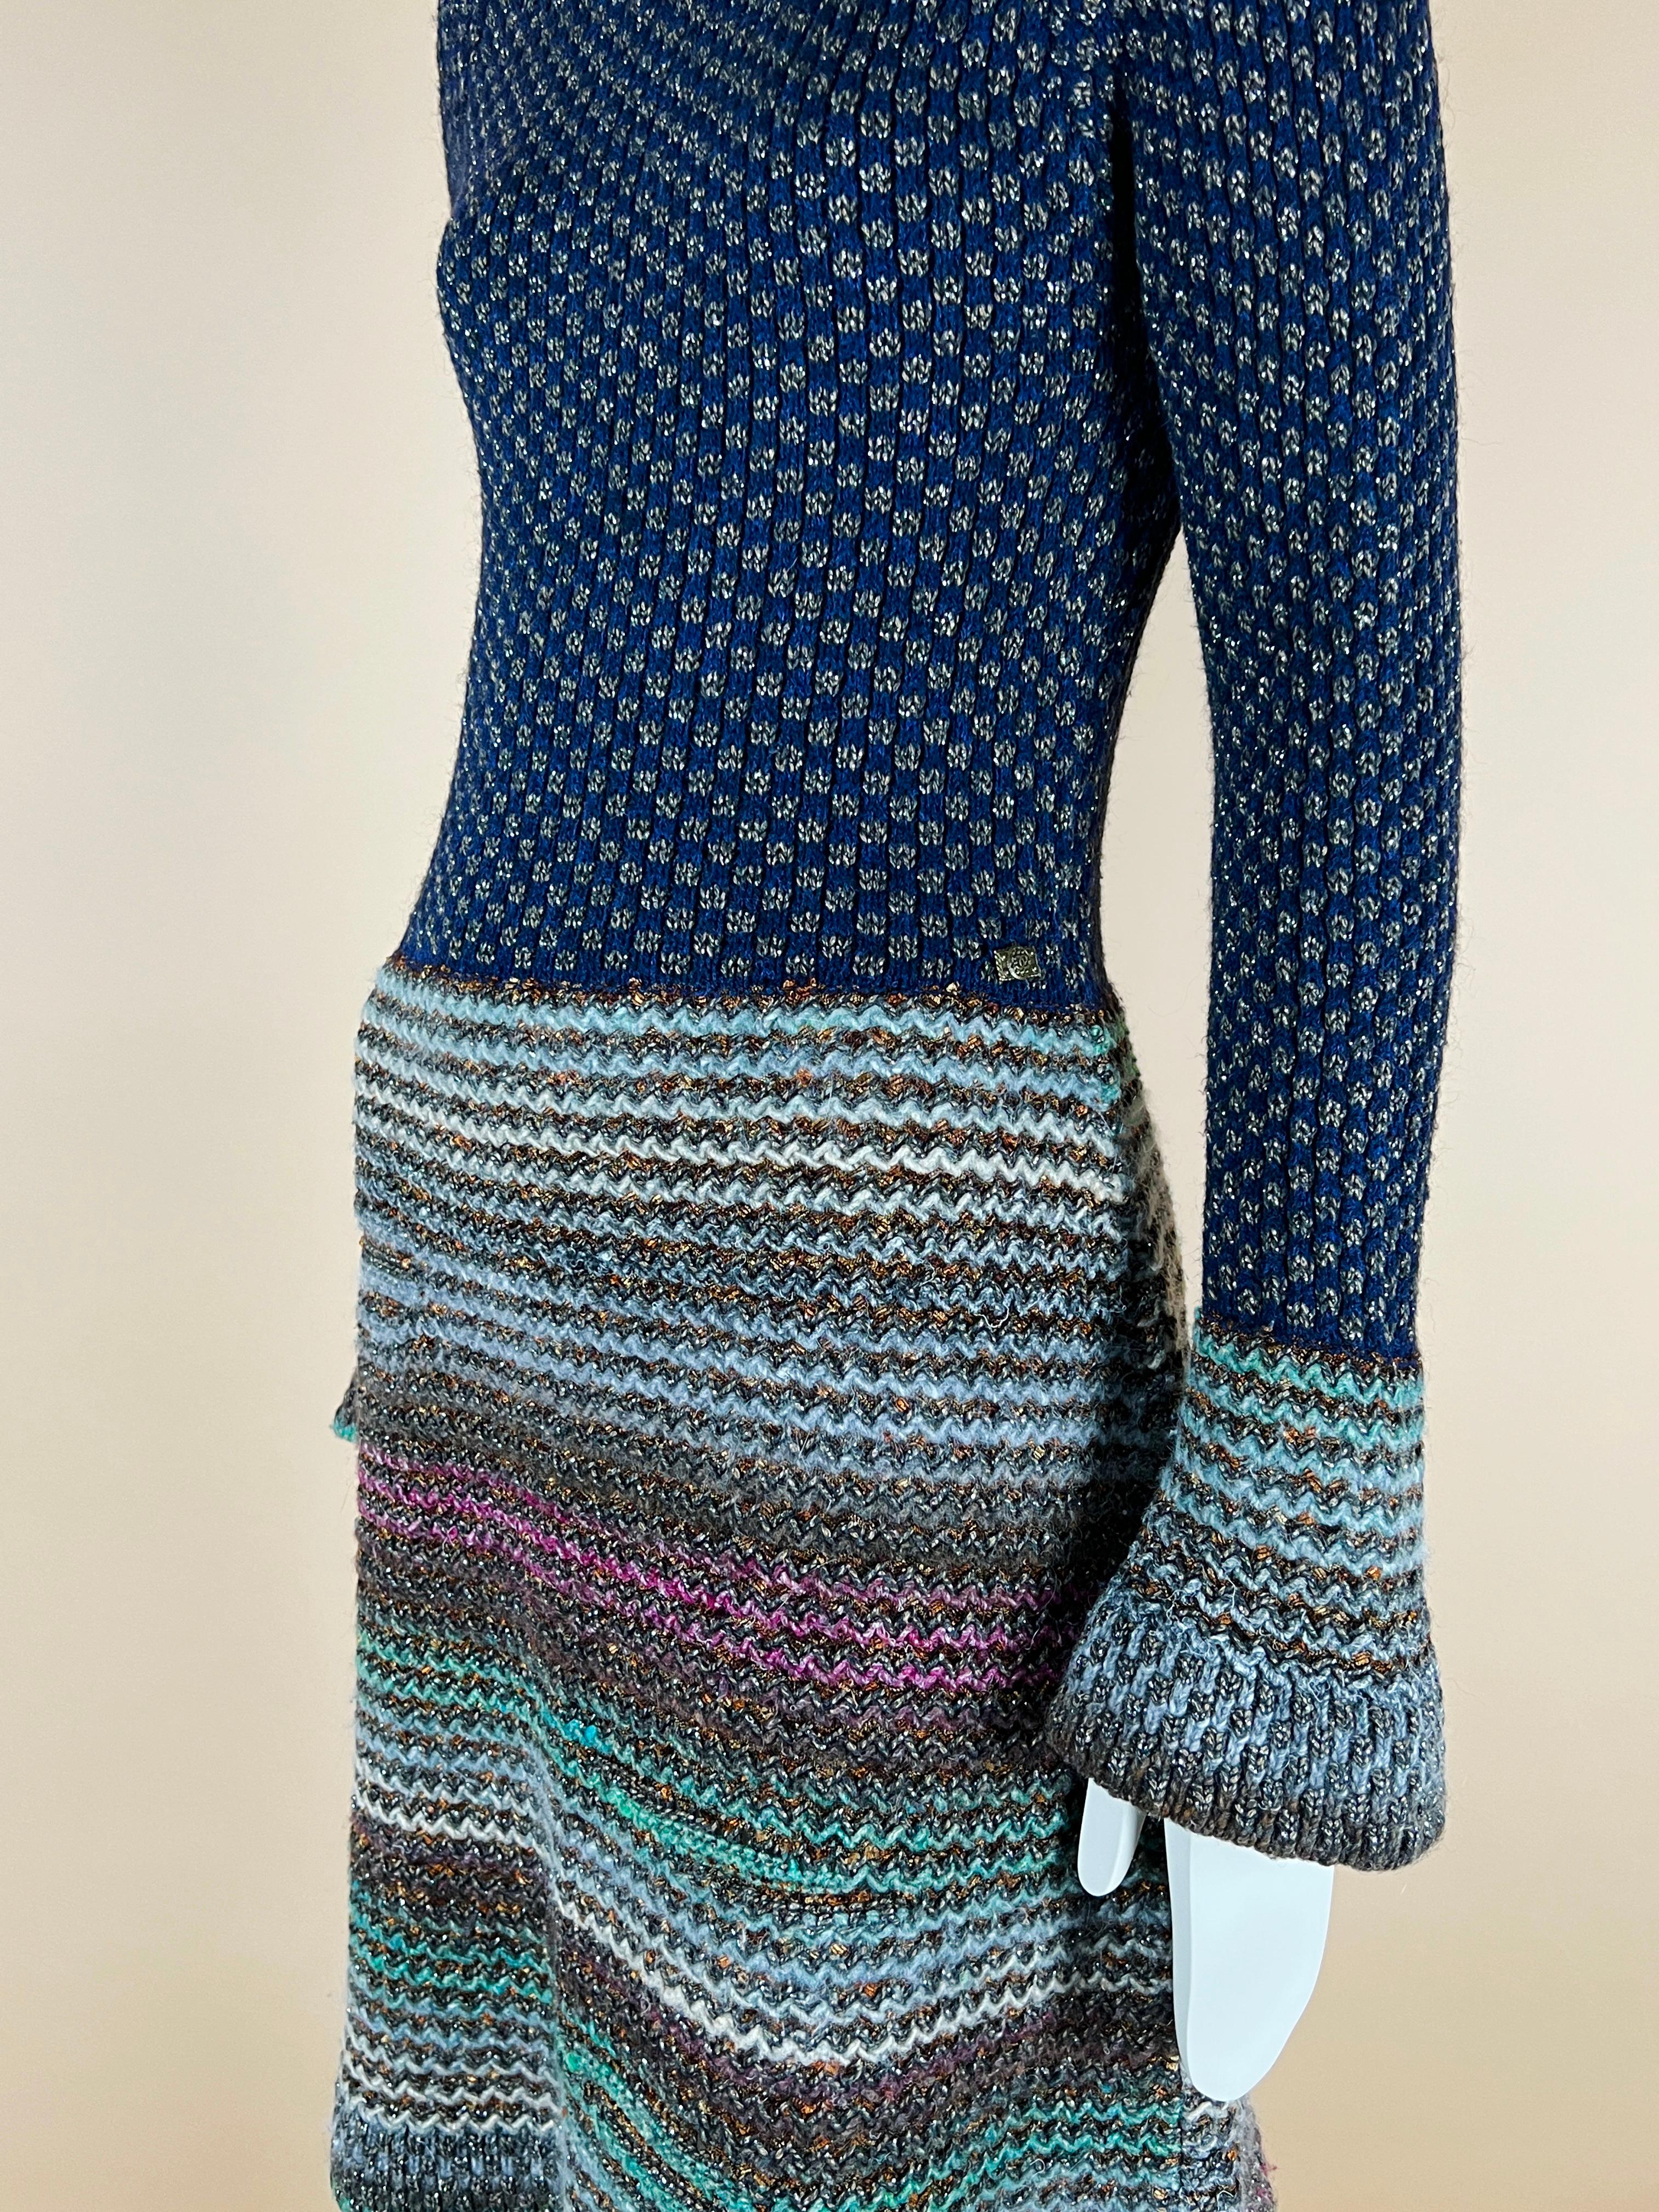 Chanel Byzance Collection Runway Dress 4